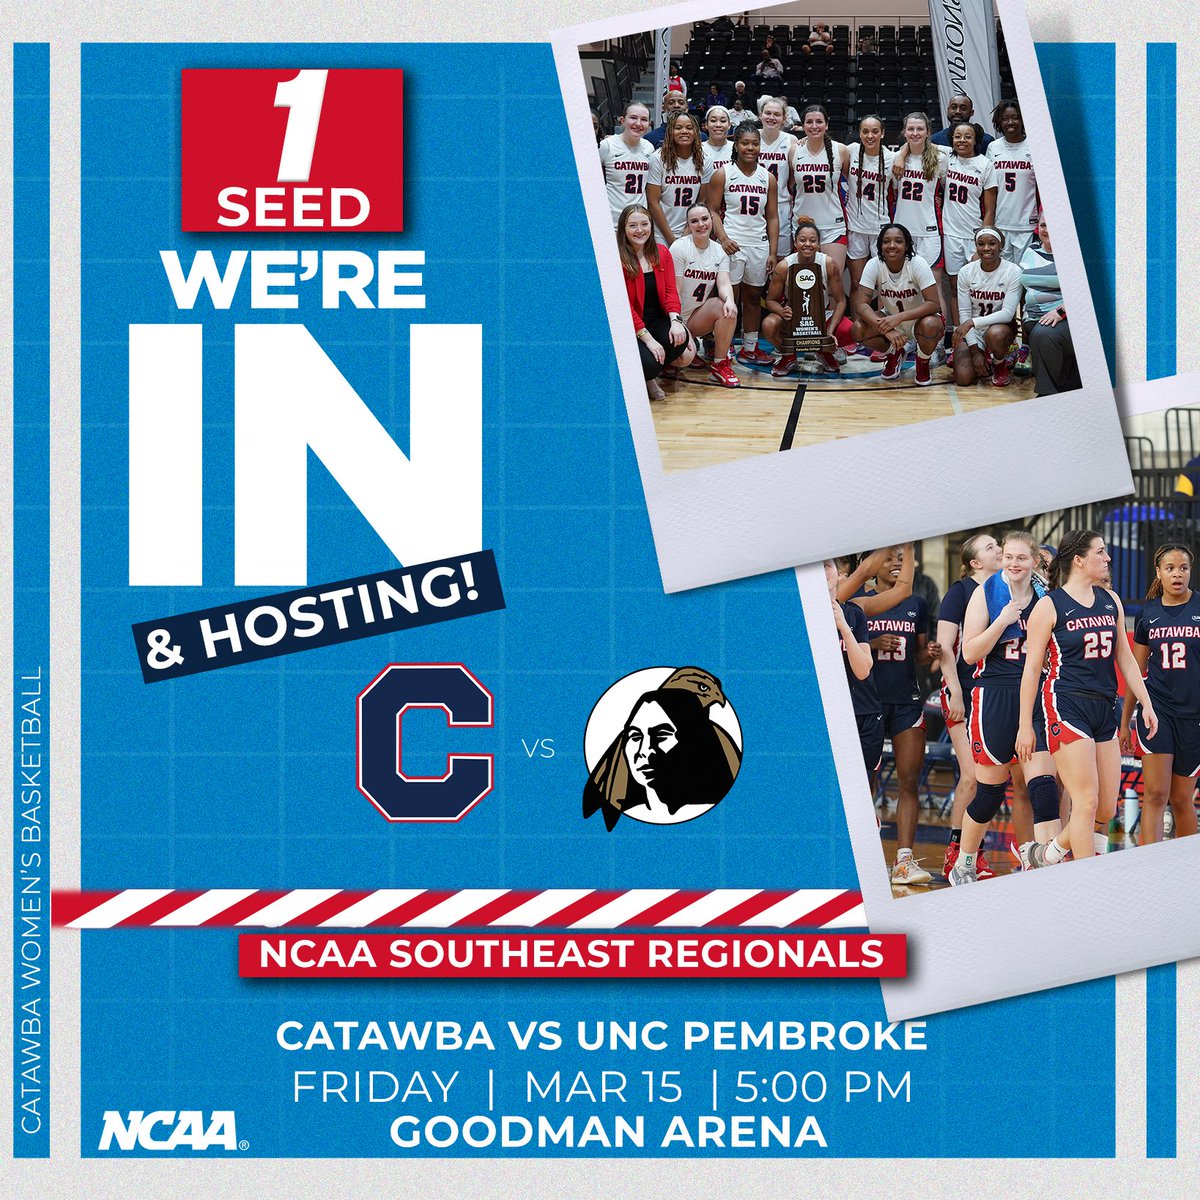 There's no place like home 😏 @catawba_wbb earns the top seed in the Southeast Regional and will defend its regional title from Goodman Arena! Release | bit.ly/3IydVJw #CatawbaCulture